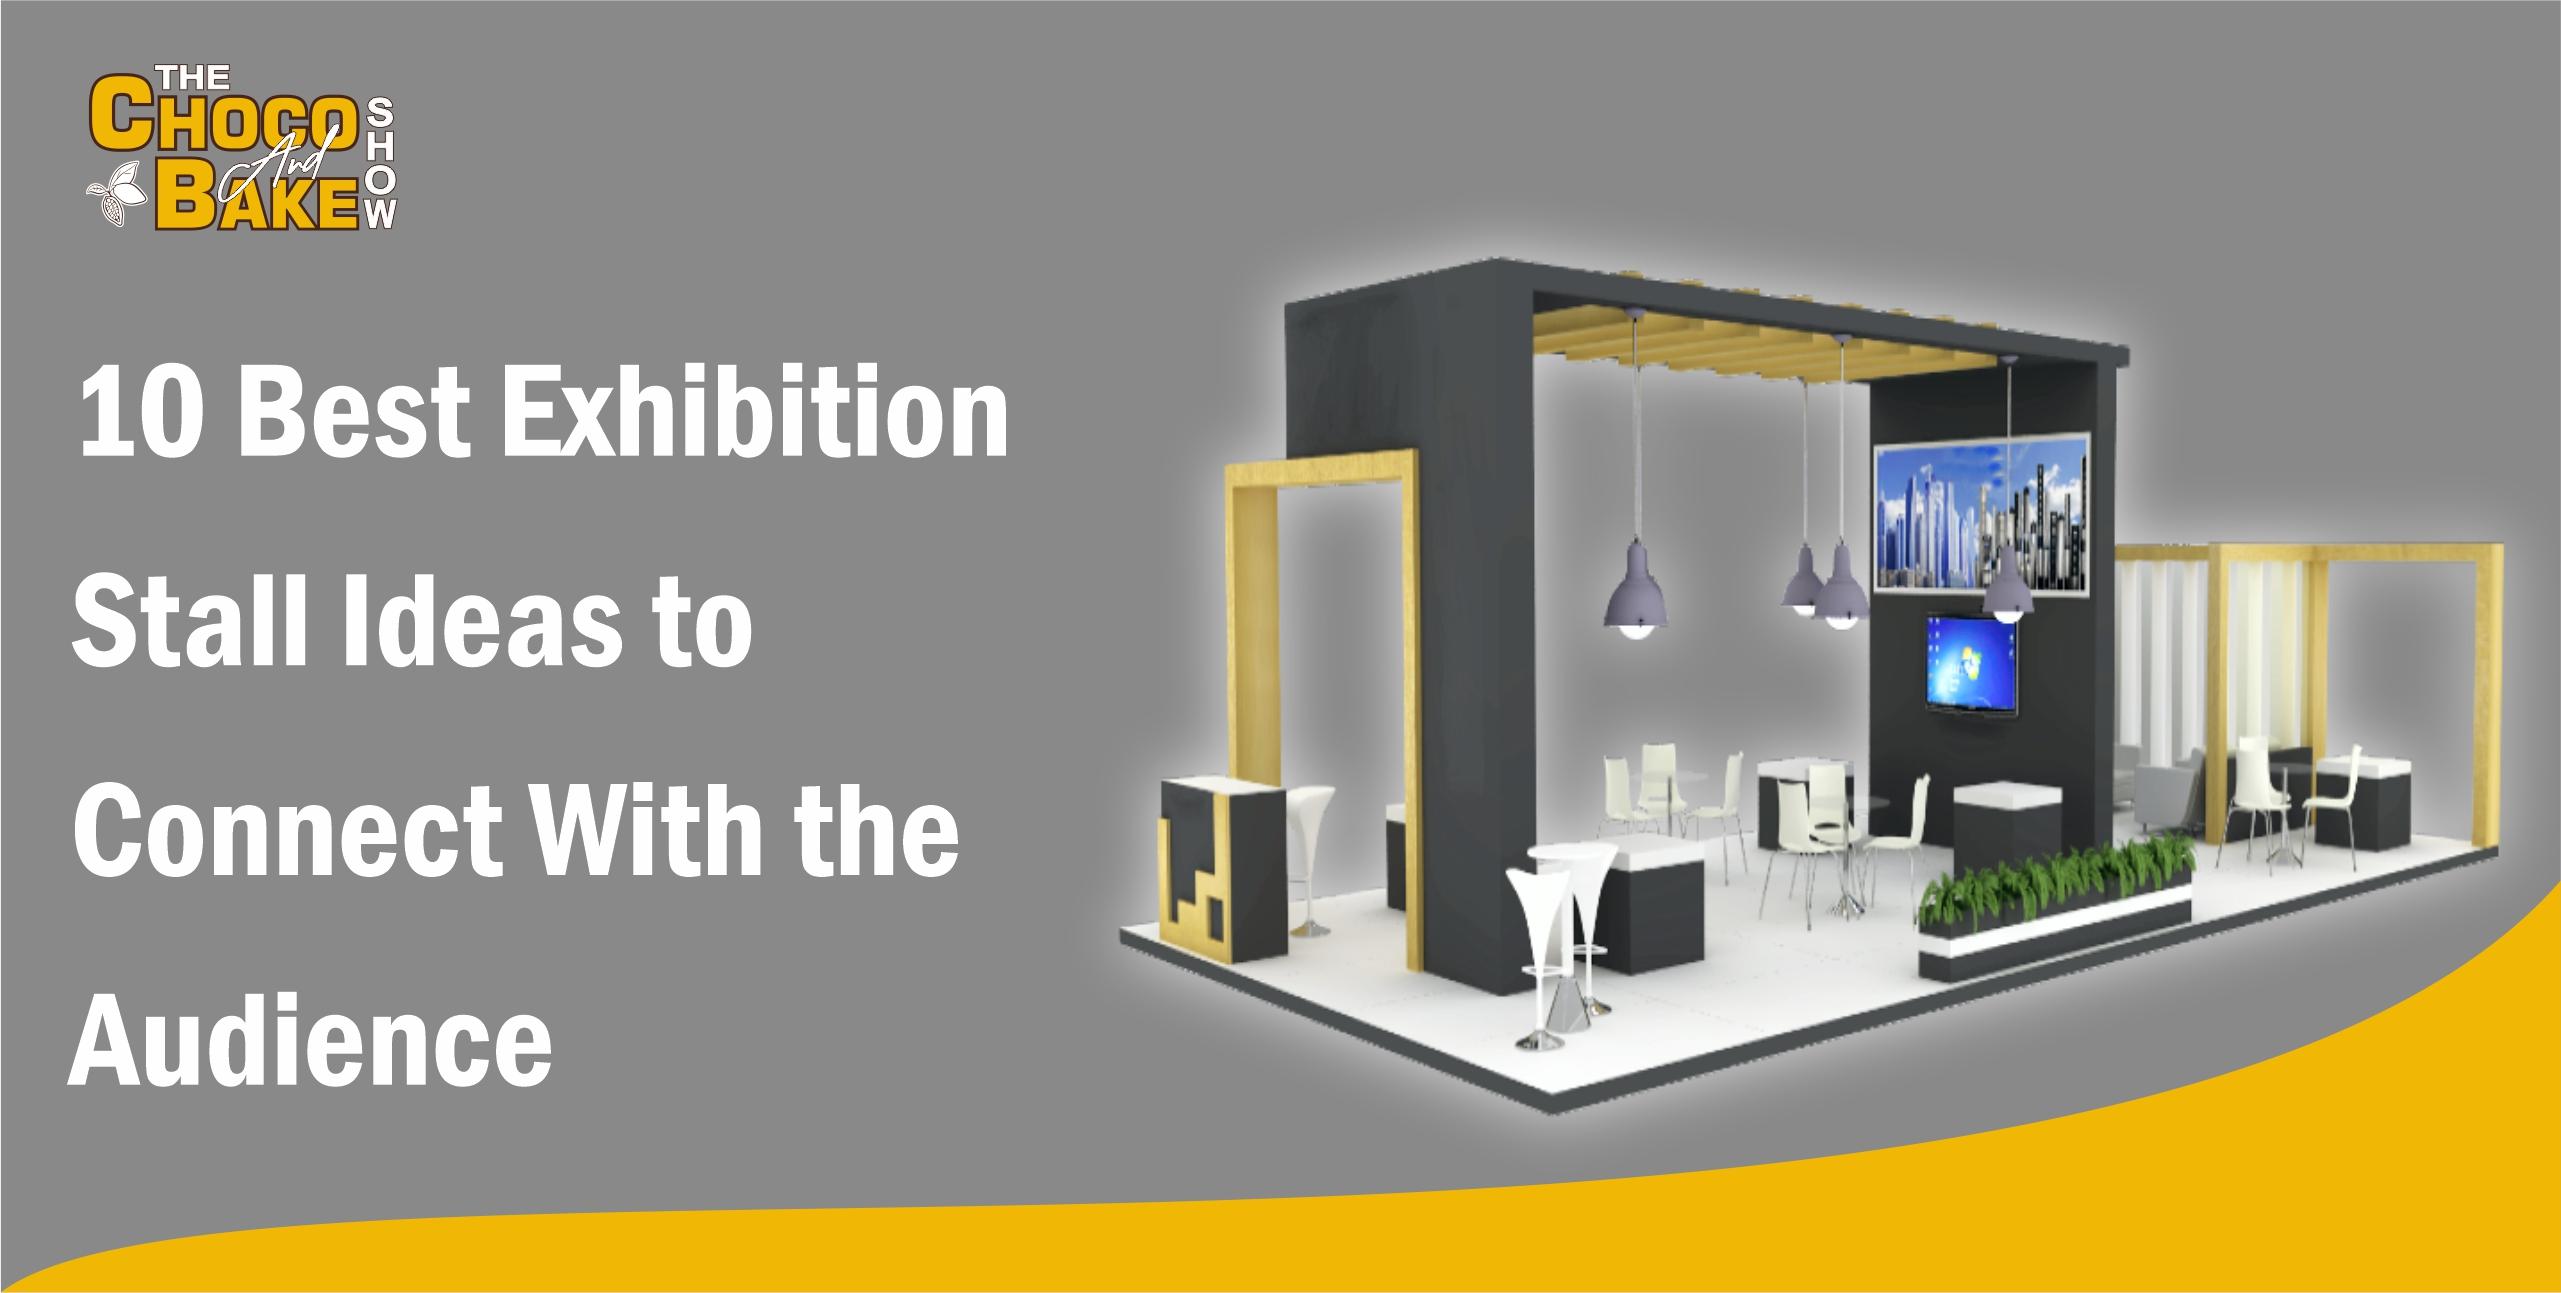 10 Best Exhibition Stall Ideas to Connect With the Audience